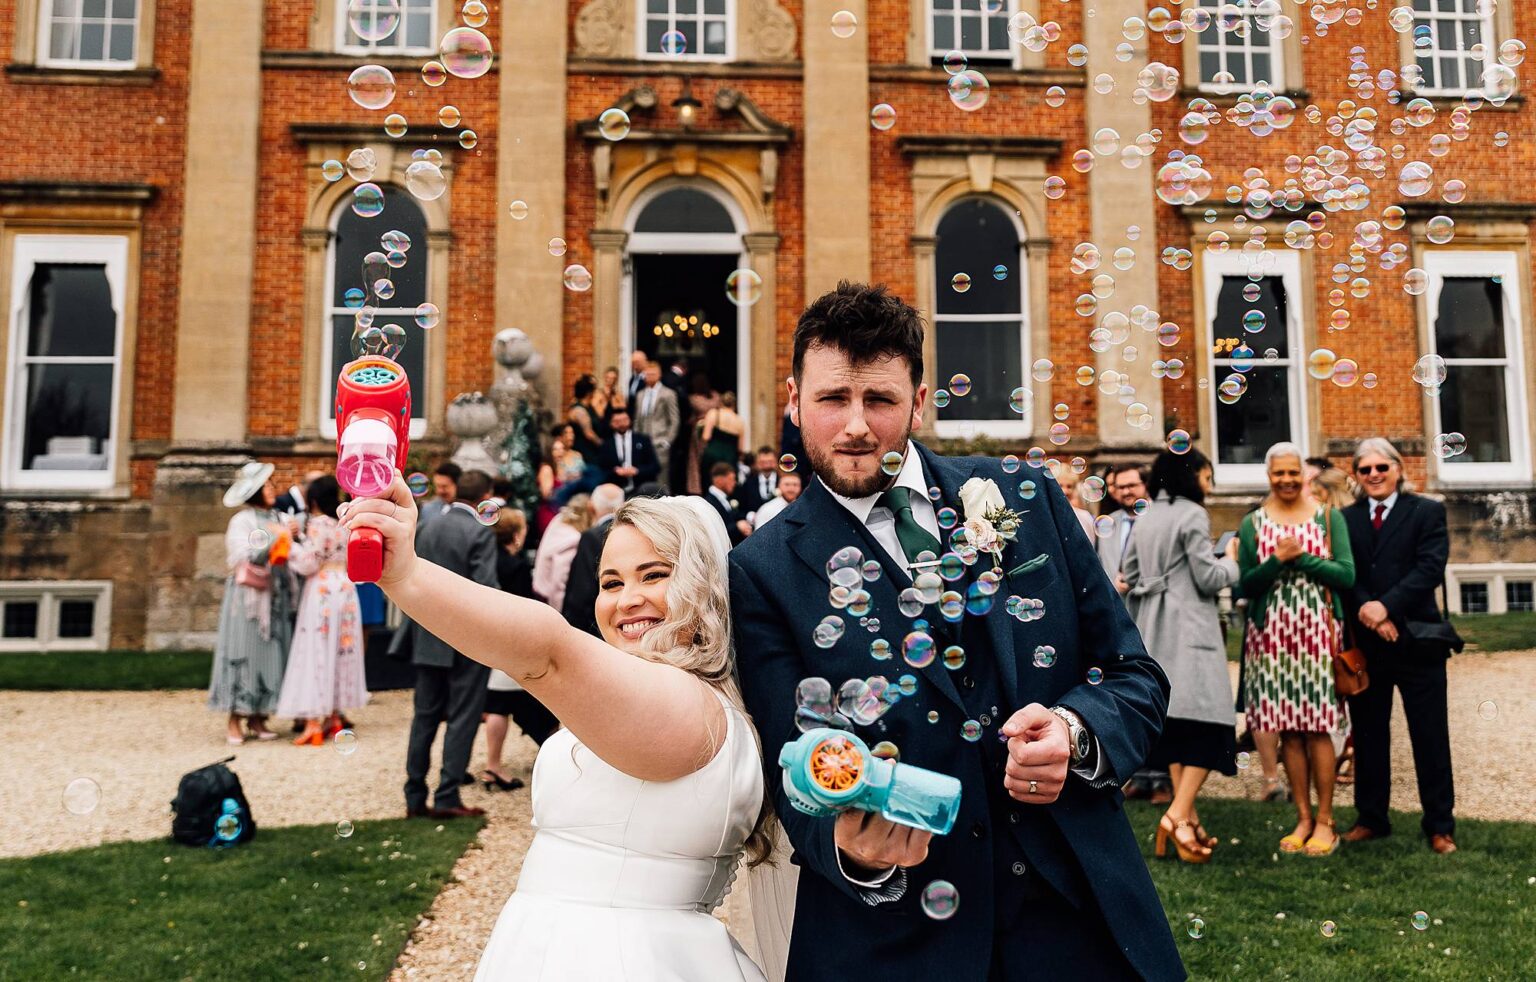 Bubble guns being used at a wedding at Crowcombe Court